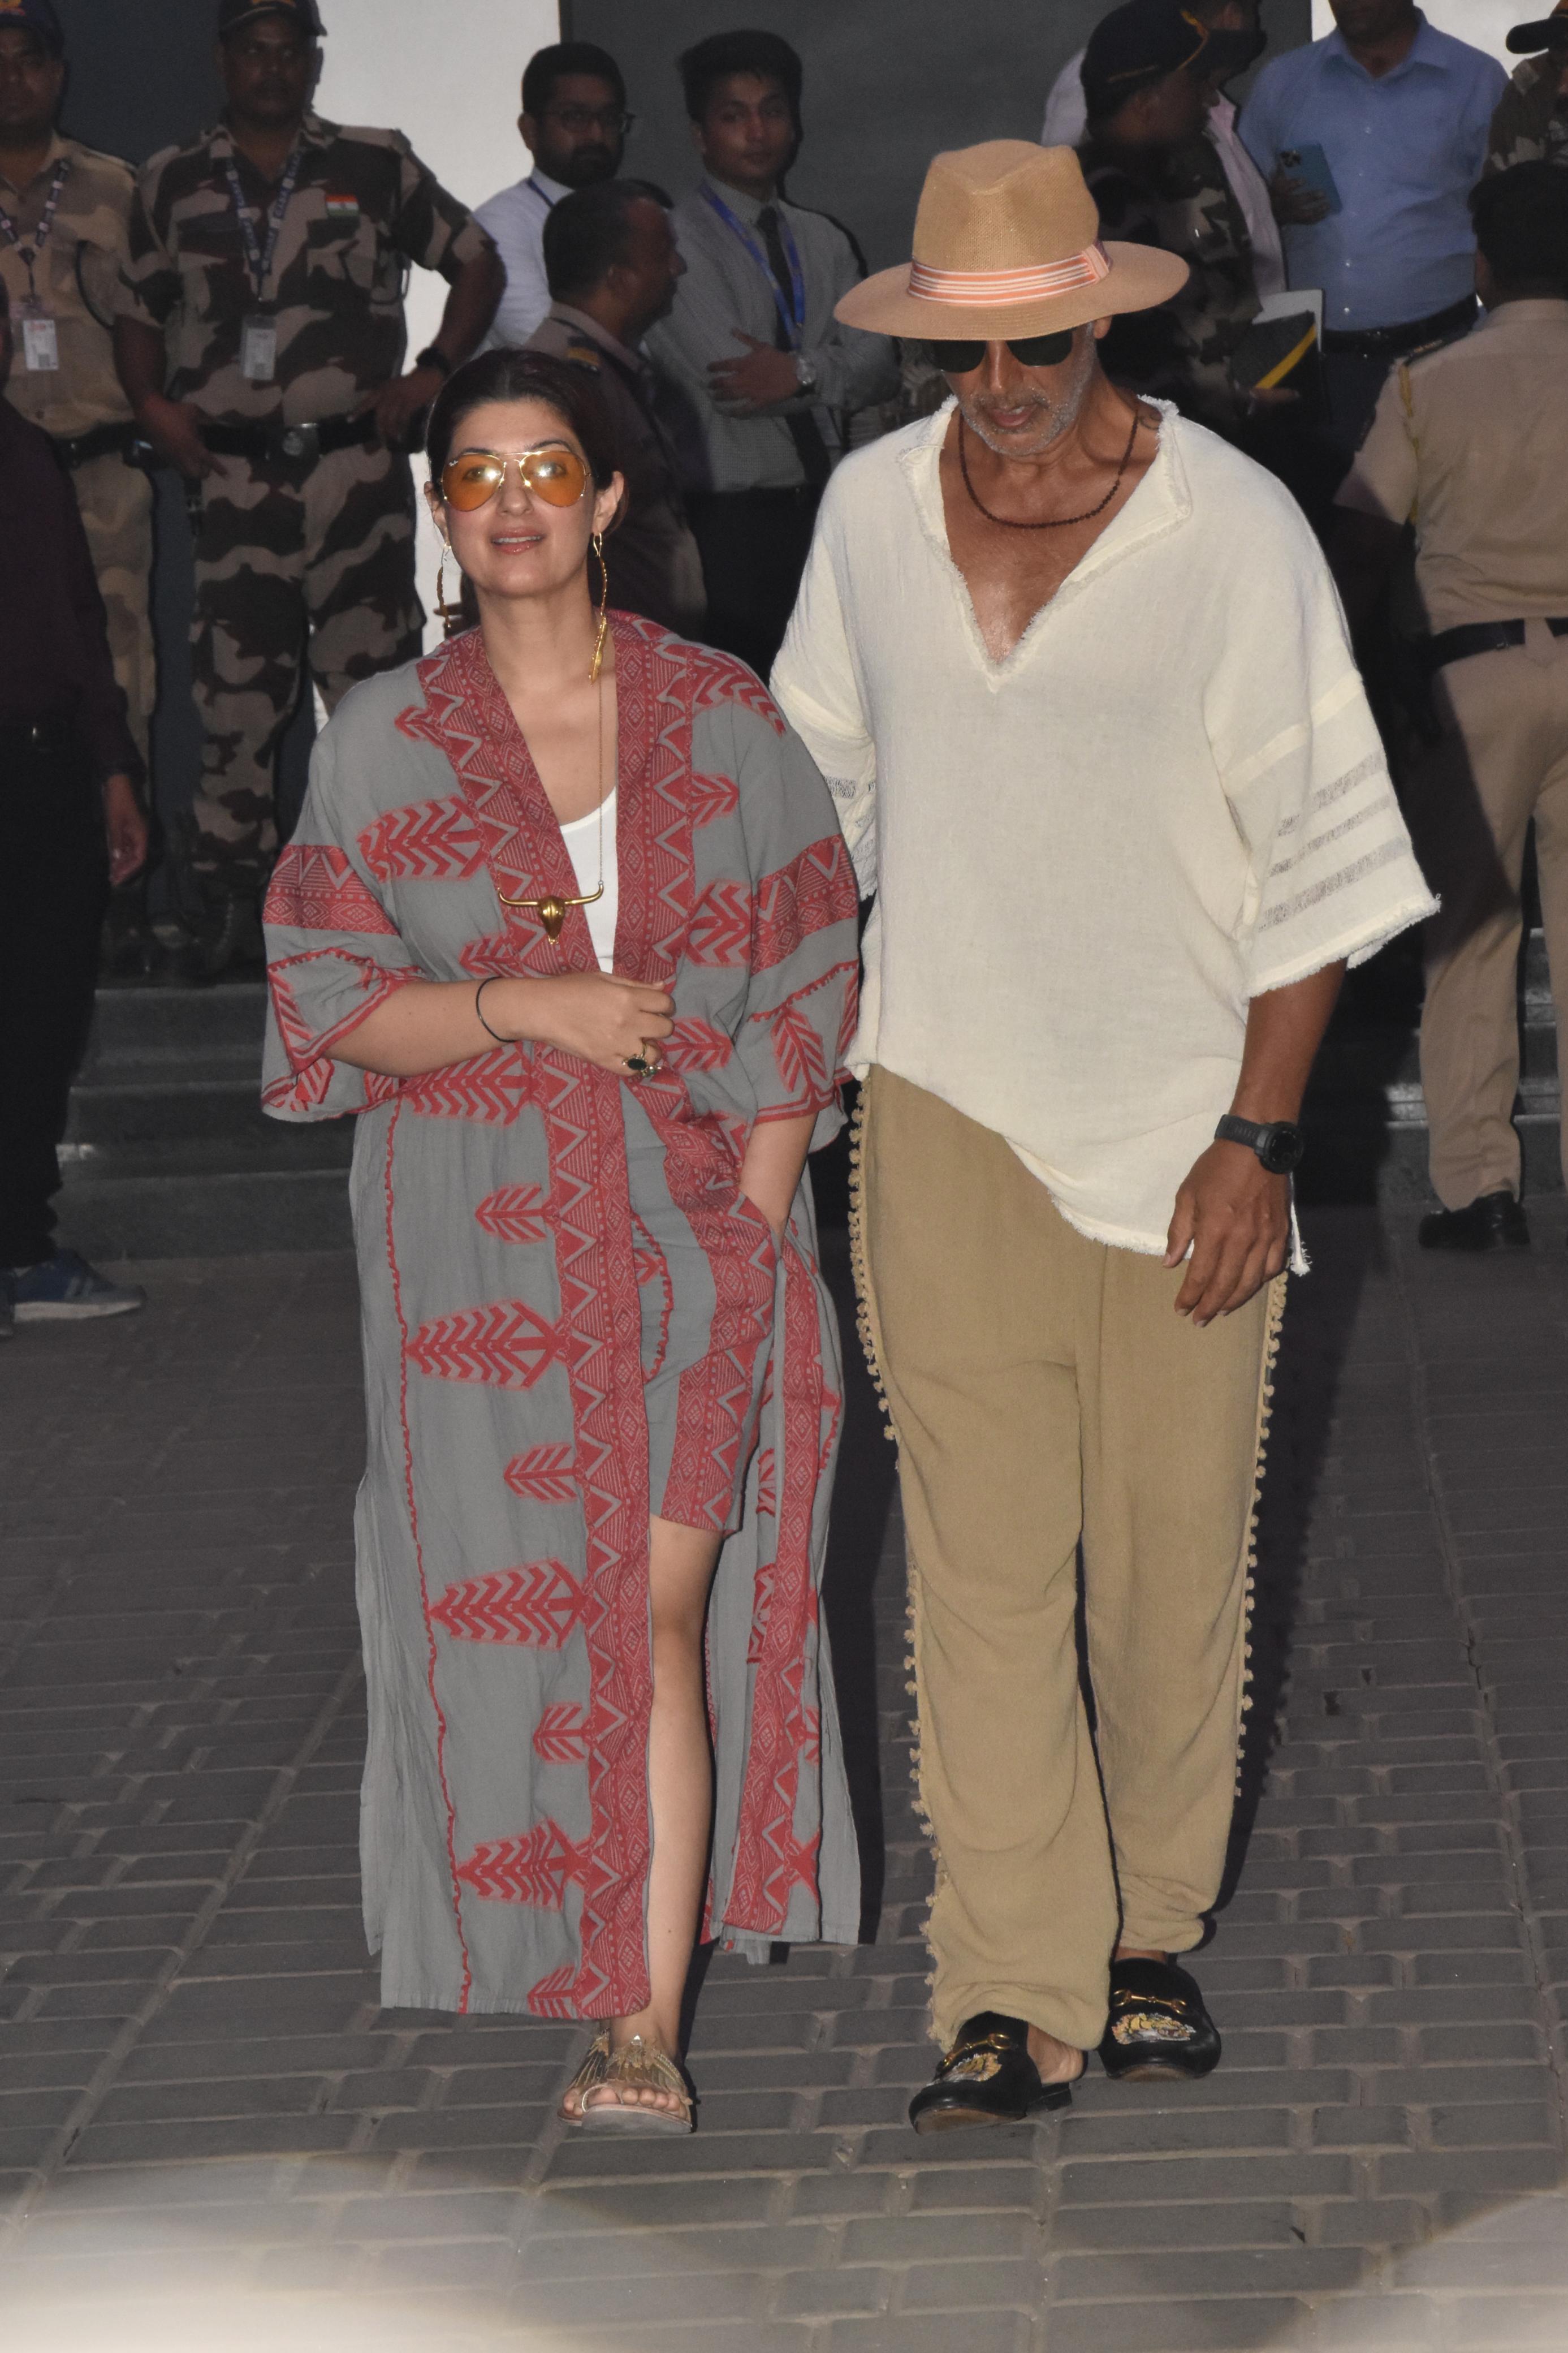 Akshay Kumar and Twinkle Khanna were clicked as they returned to the city